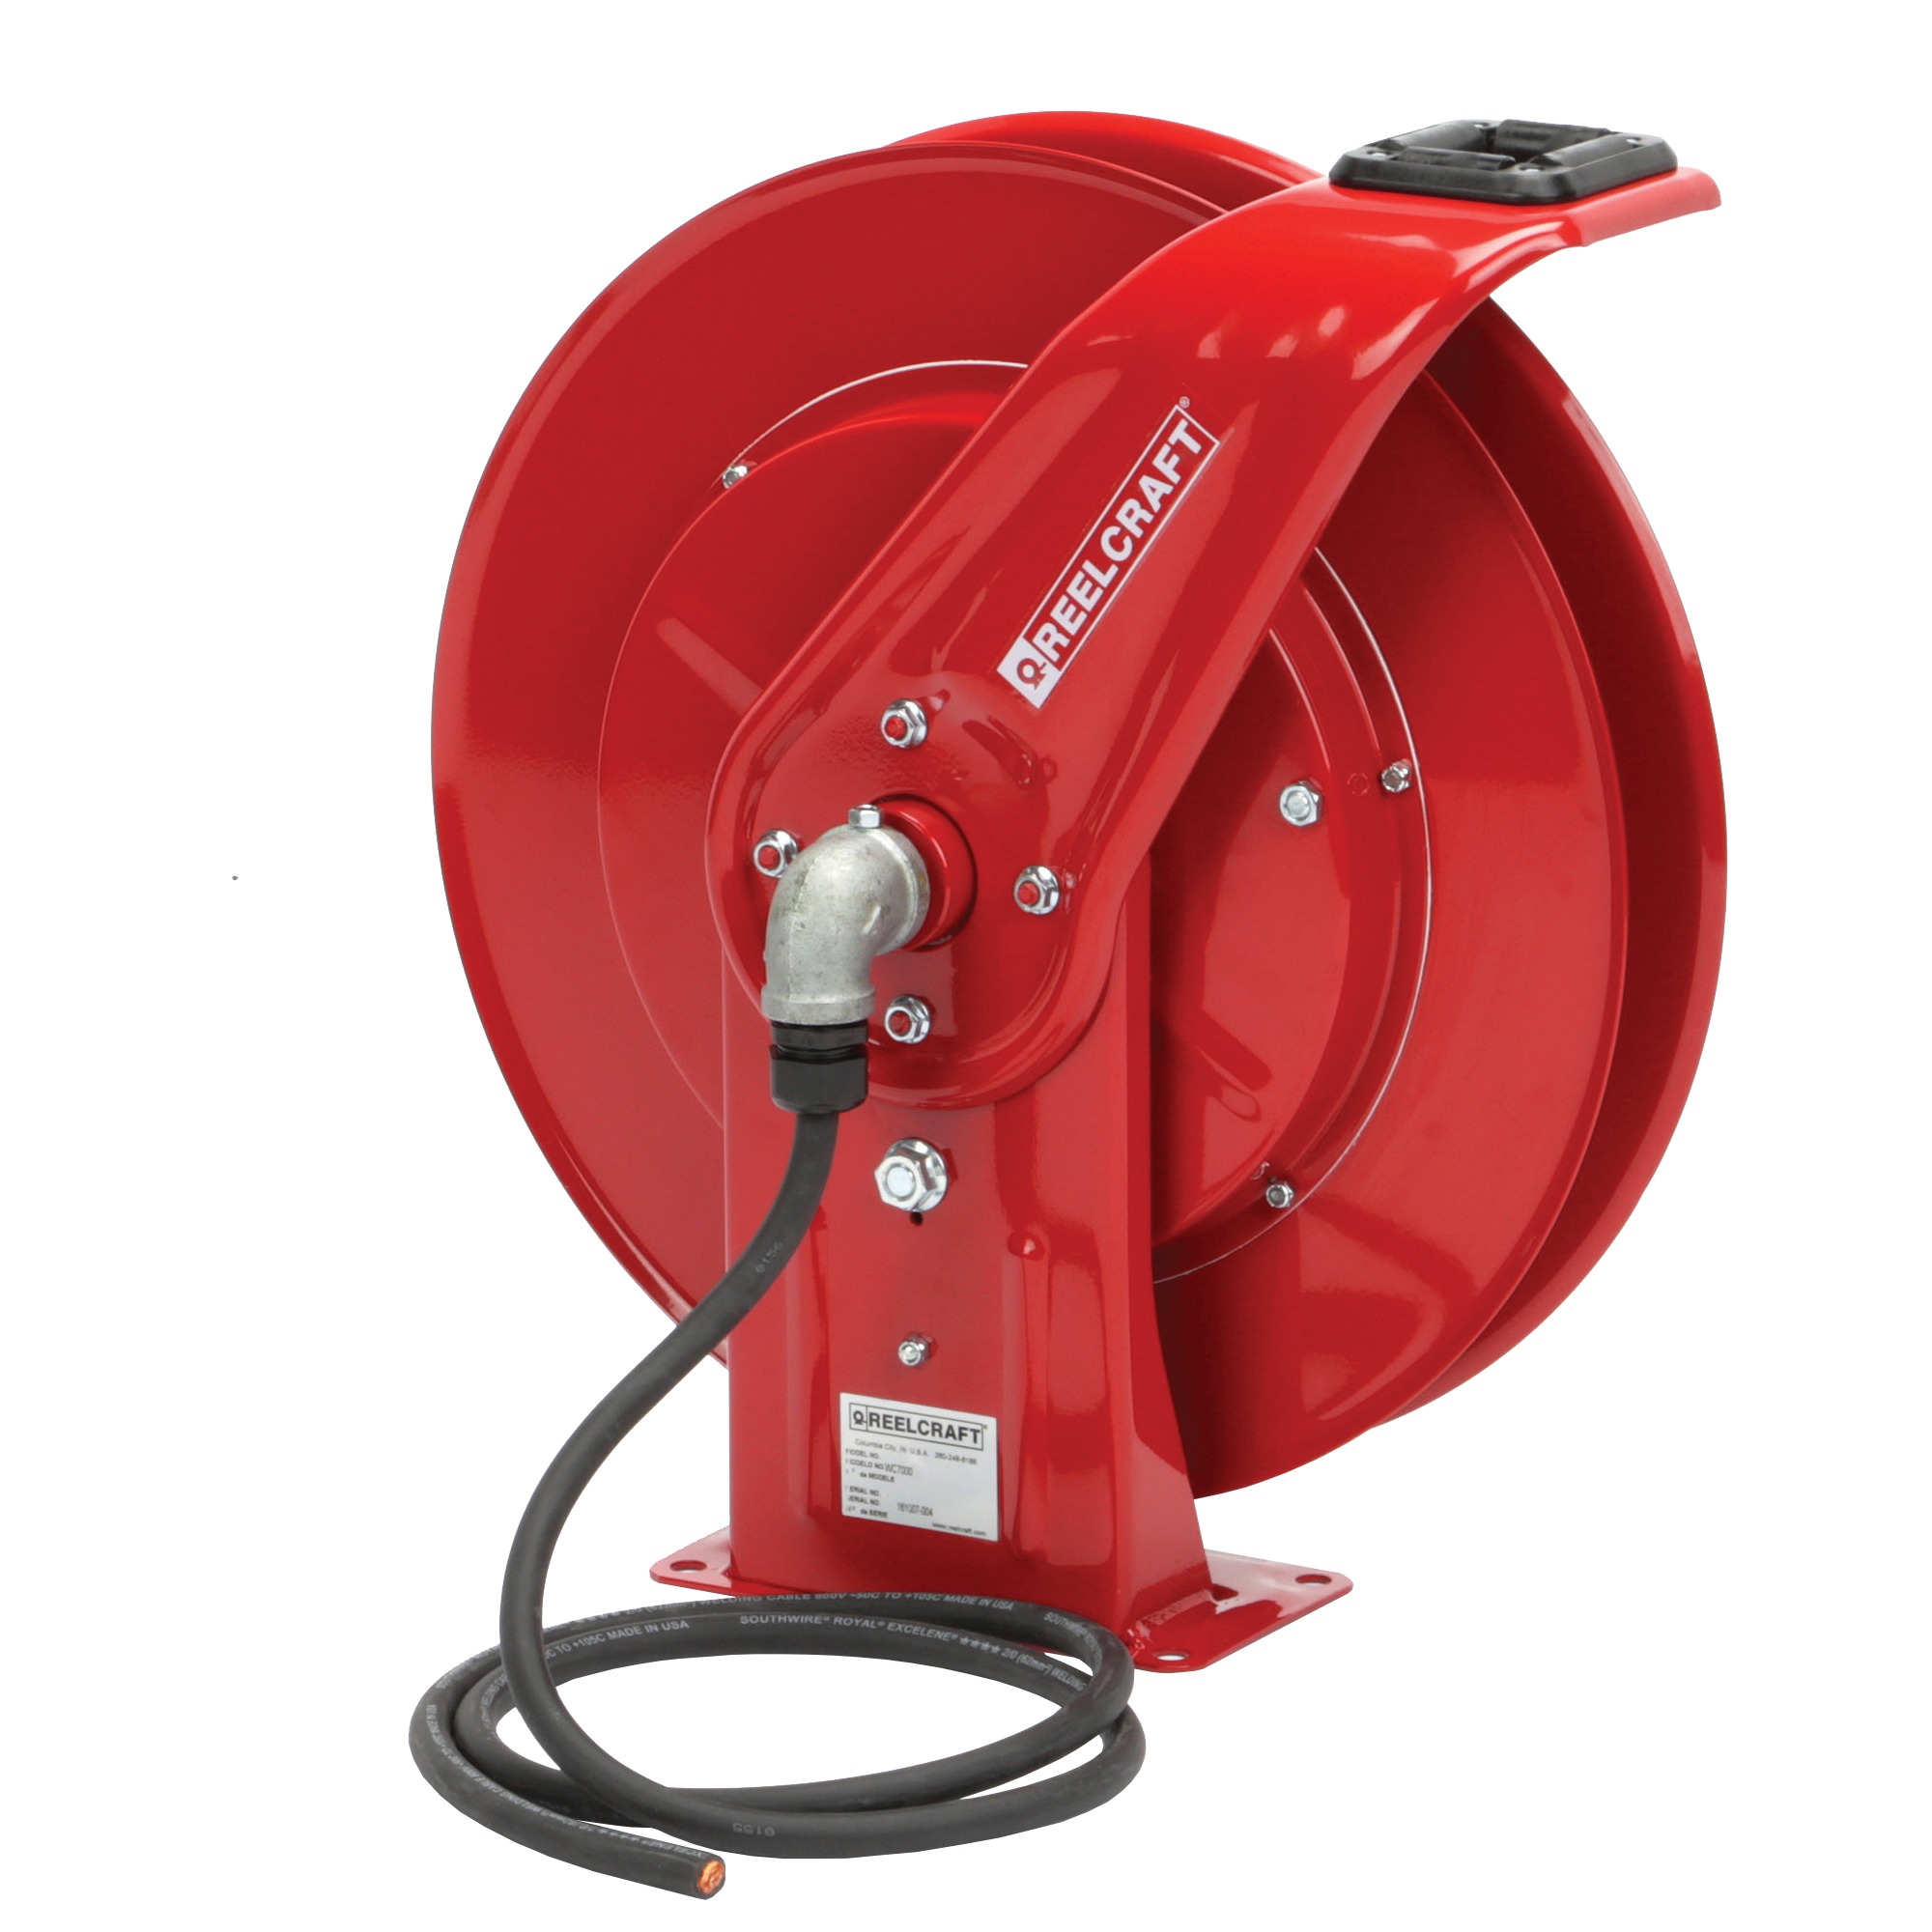 WCH7000 - Premium Duty 700 Amp Cable Welding Reel - Hose, Cord and Cable  Reels - Reelcraft